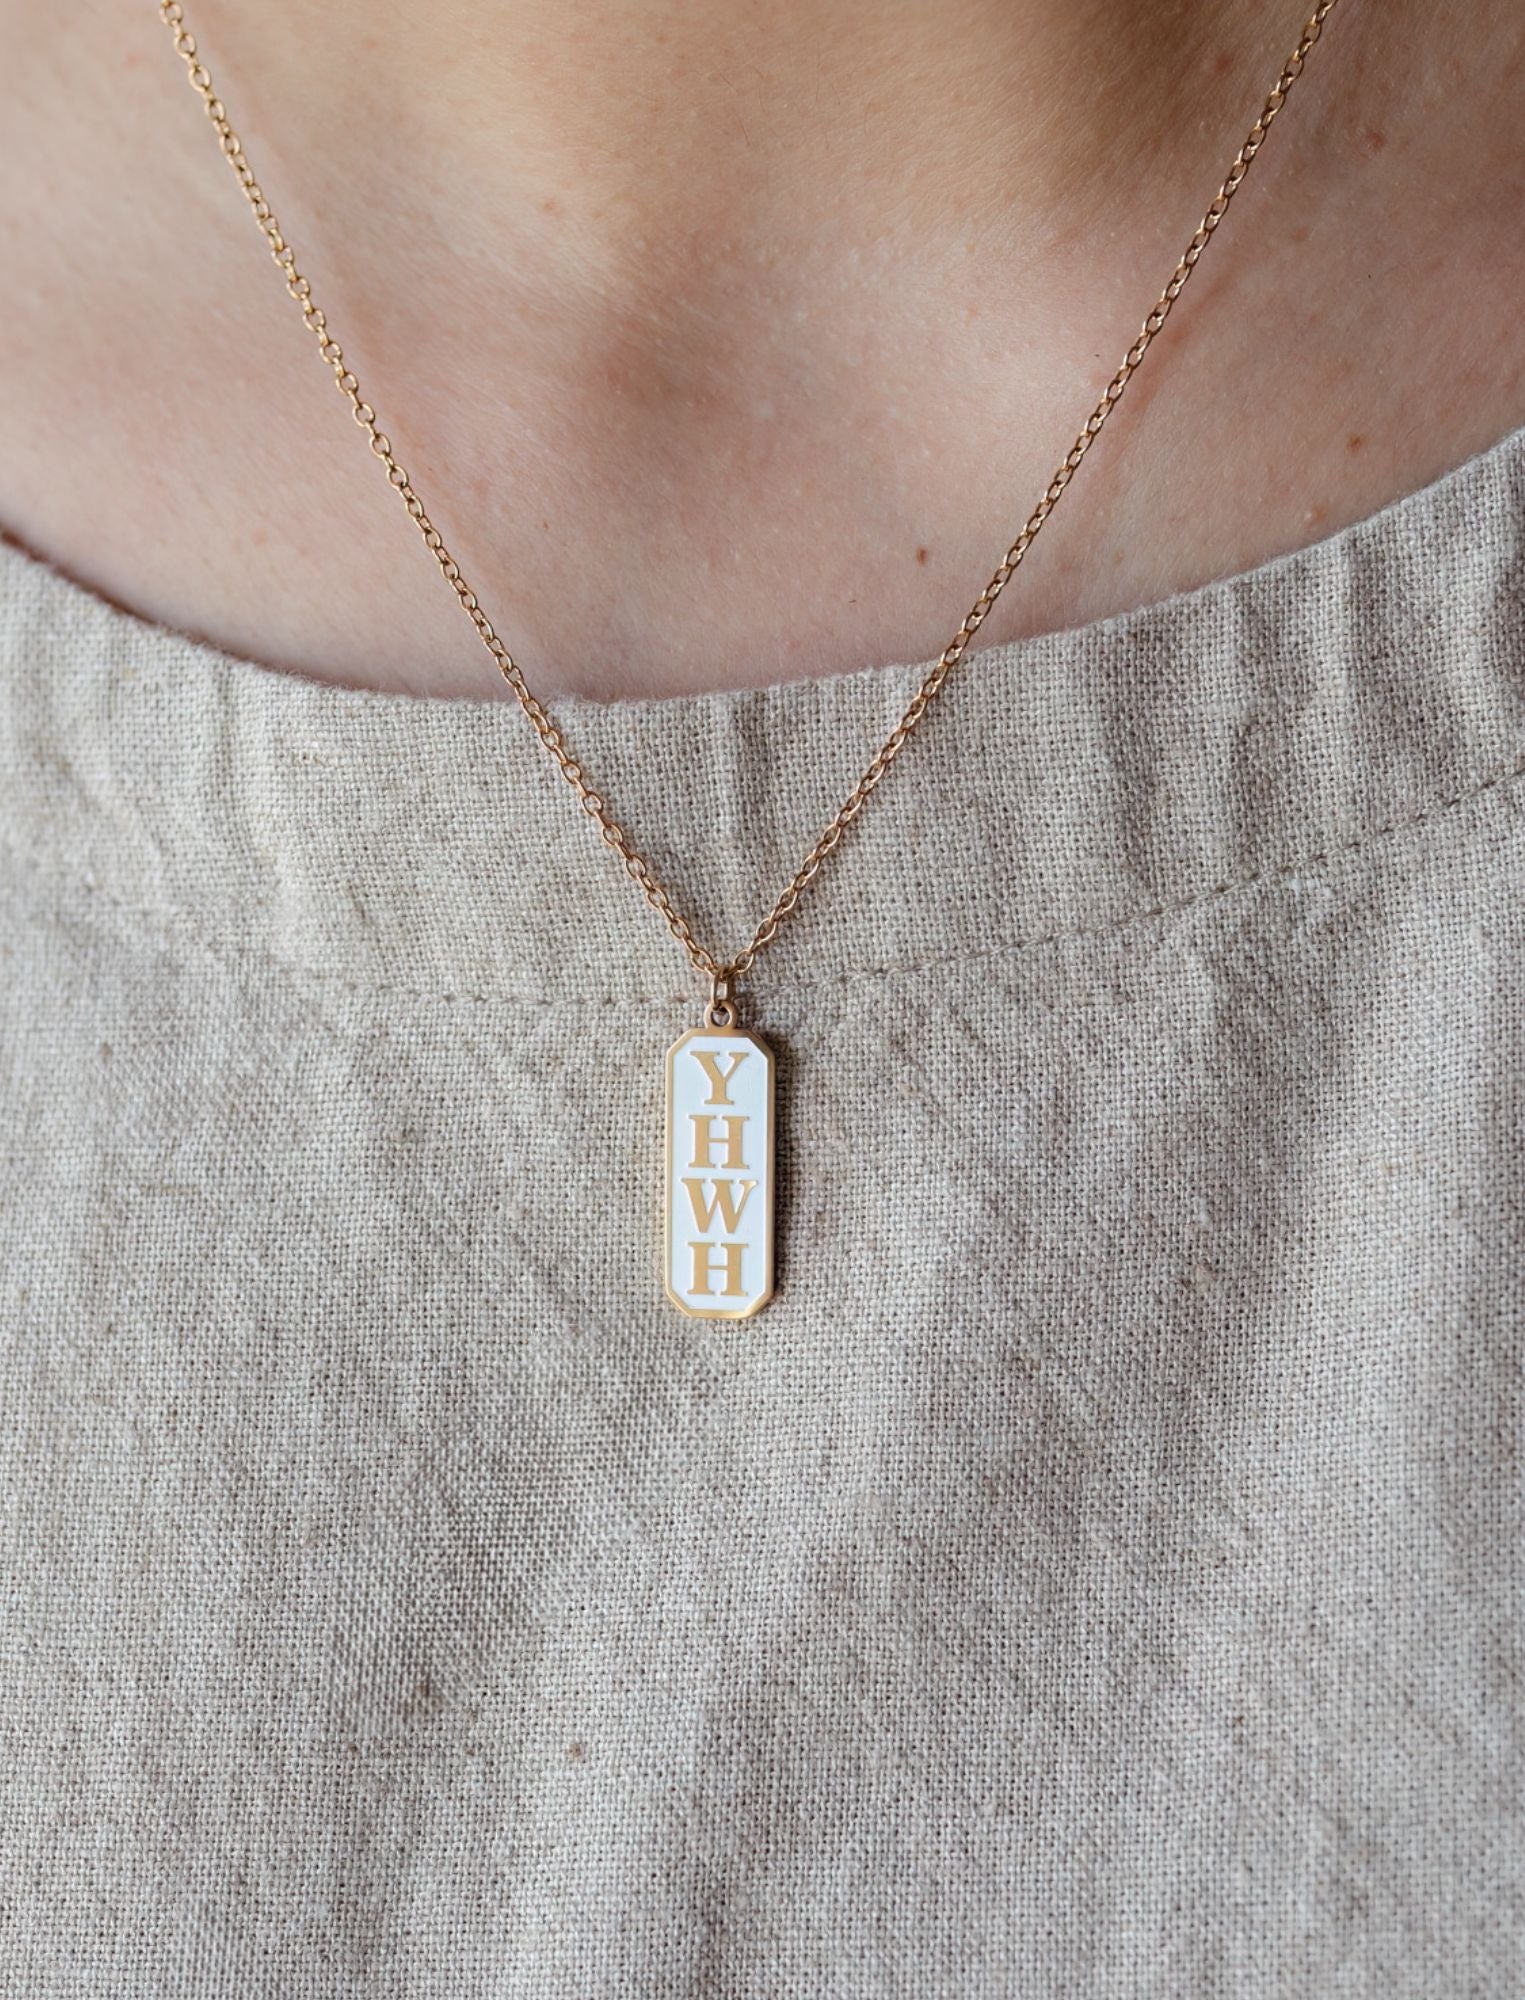 Necklace: YHWH